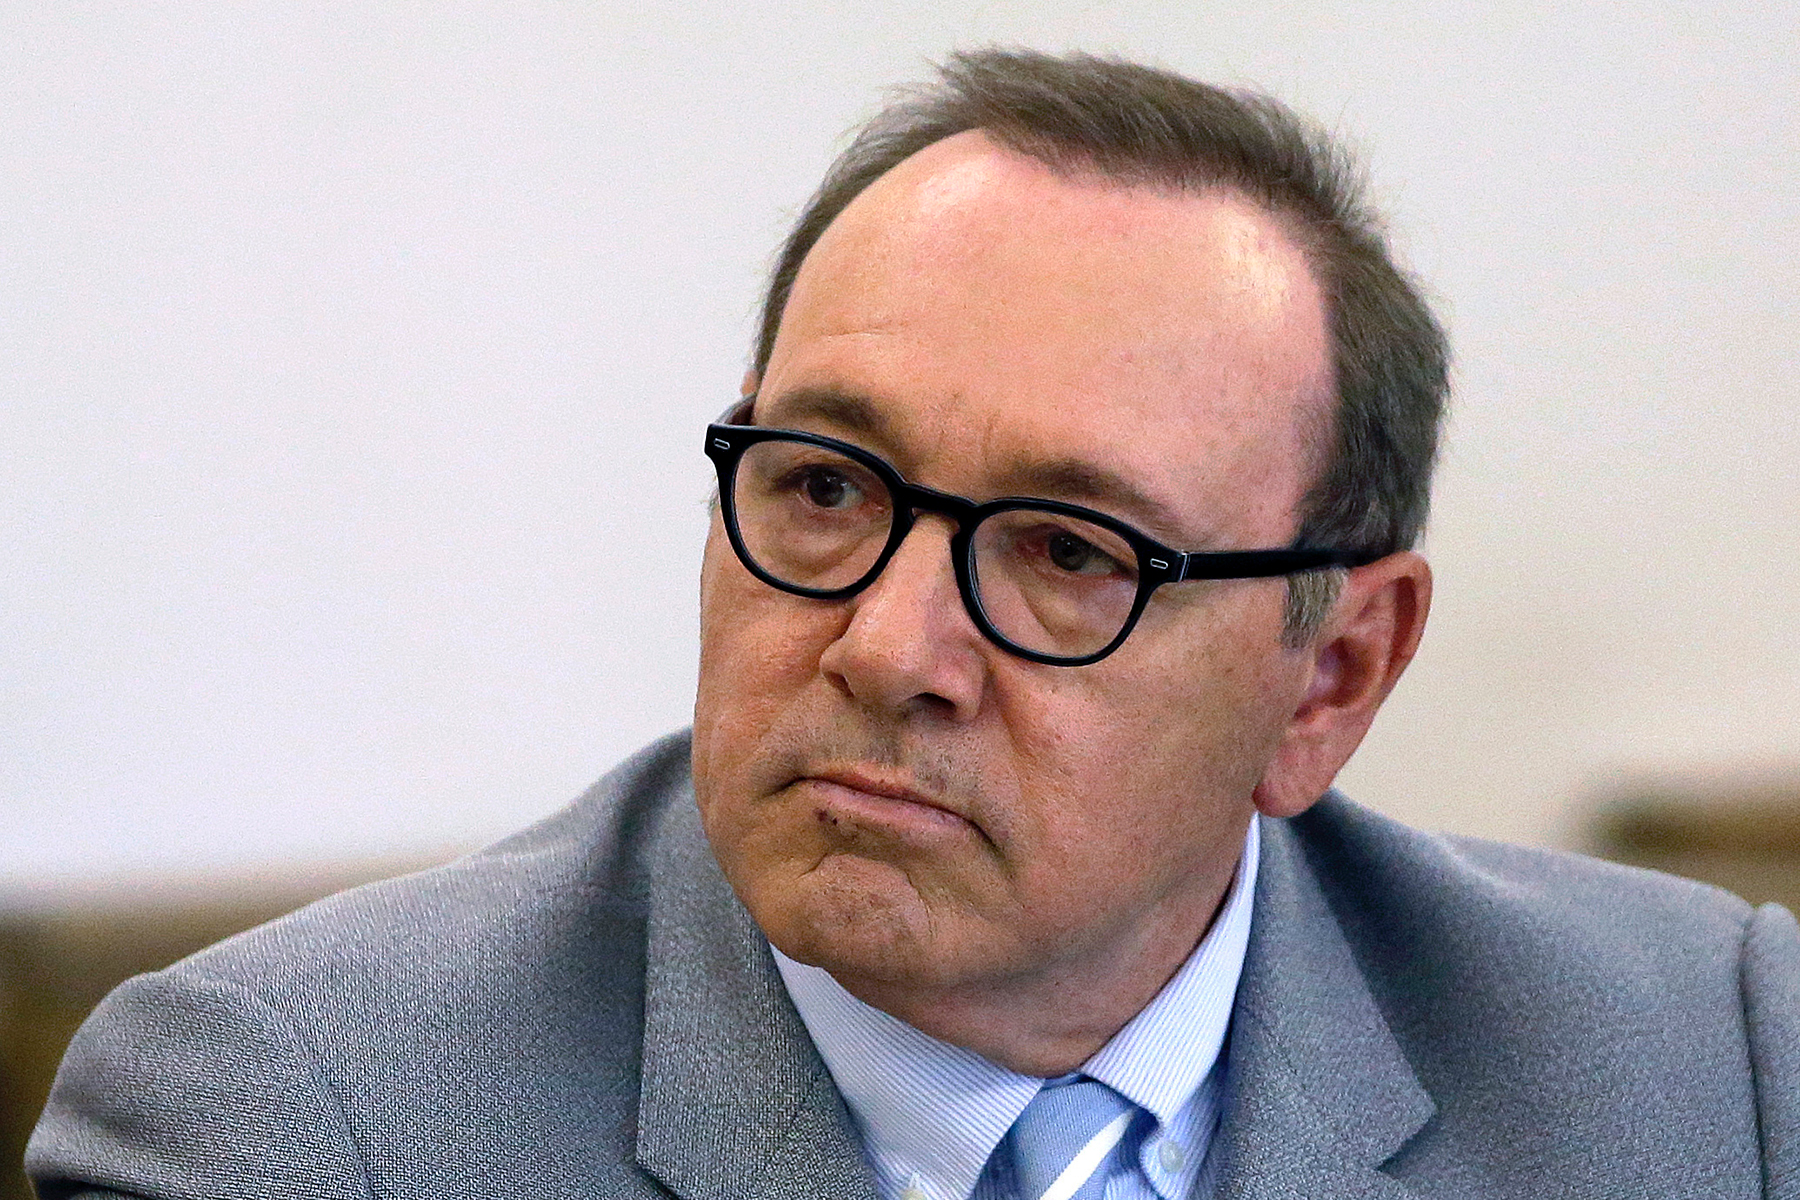 FILE - In this June 3, 2019 file photo, actor Kevin Spacey attends a pretrial hearing at district court in Nantucket, Mass. The Oscar-winning actor is accused of groping the teenage son of a former Boston TV anchor in 2016 in the crowded bar at the Club Car in Nantucket. An attorney for the man who has accused Spacey says, Wednesday, June 19, 2019, that the man cannot find a cellphone he has been ordered to turn over to the defense. Spacey's lawyers want to try to recover text messages they say would help the actor's case. (AP Photo/Steven Senne)